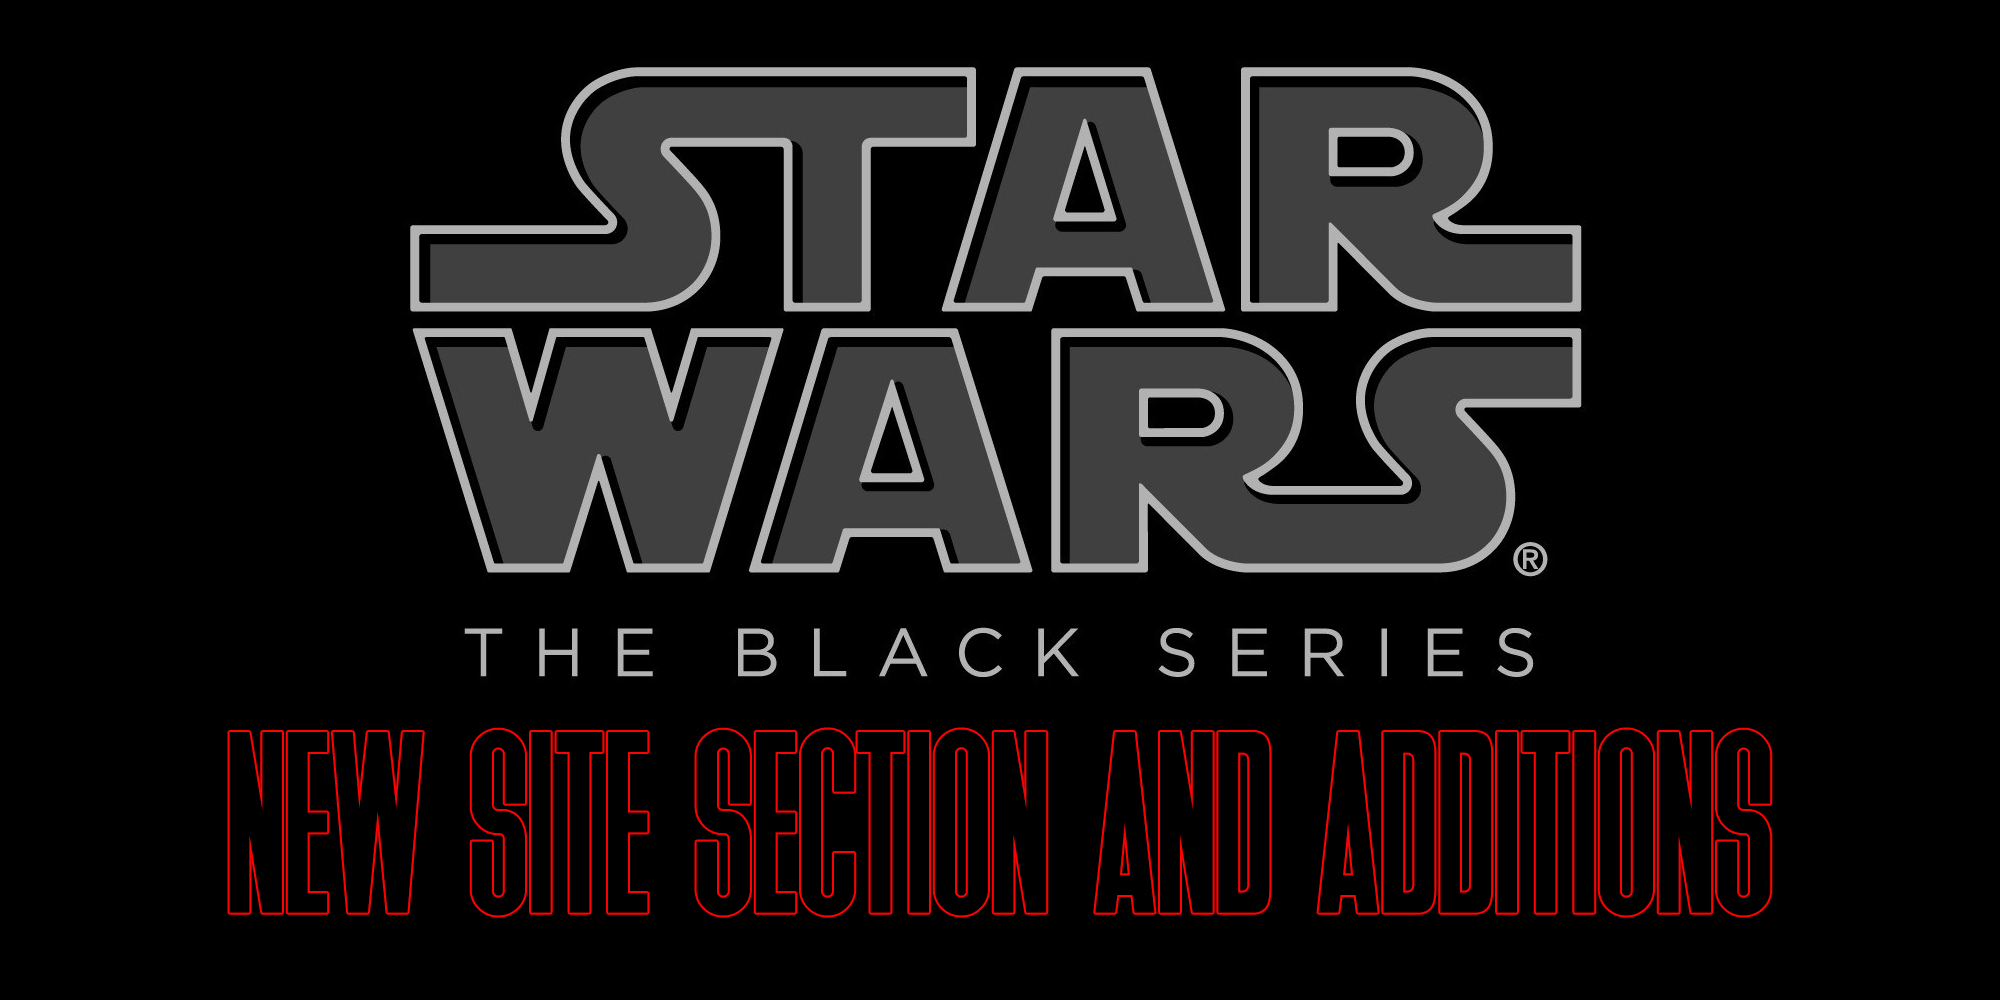 New Black Series Site Section And New Additions